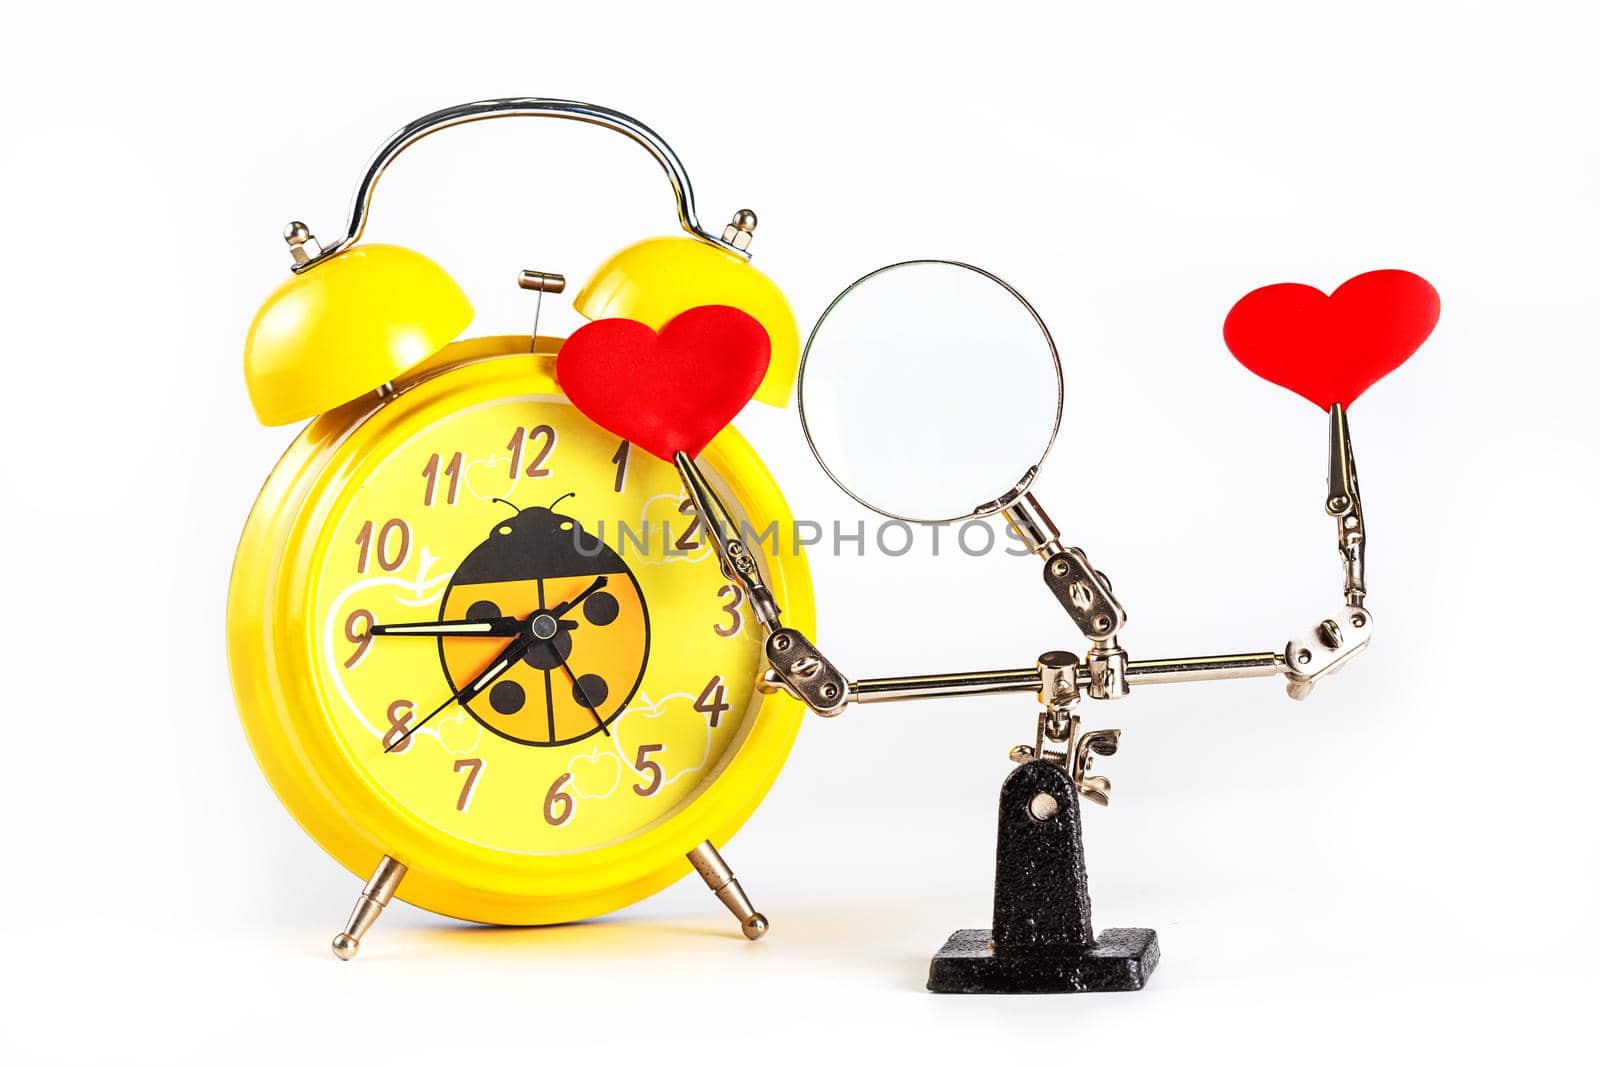 .Valentines Day background with tool third hand holding hearts and clock on white by galinasharapova